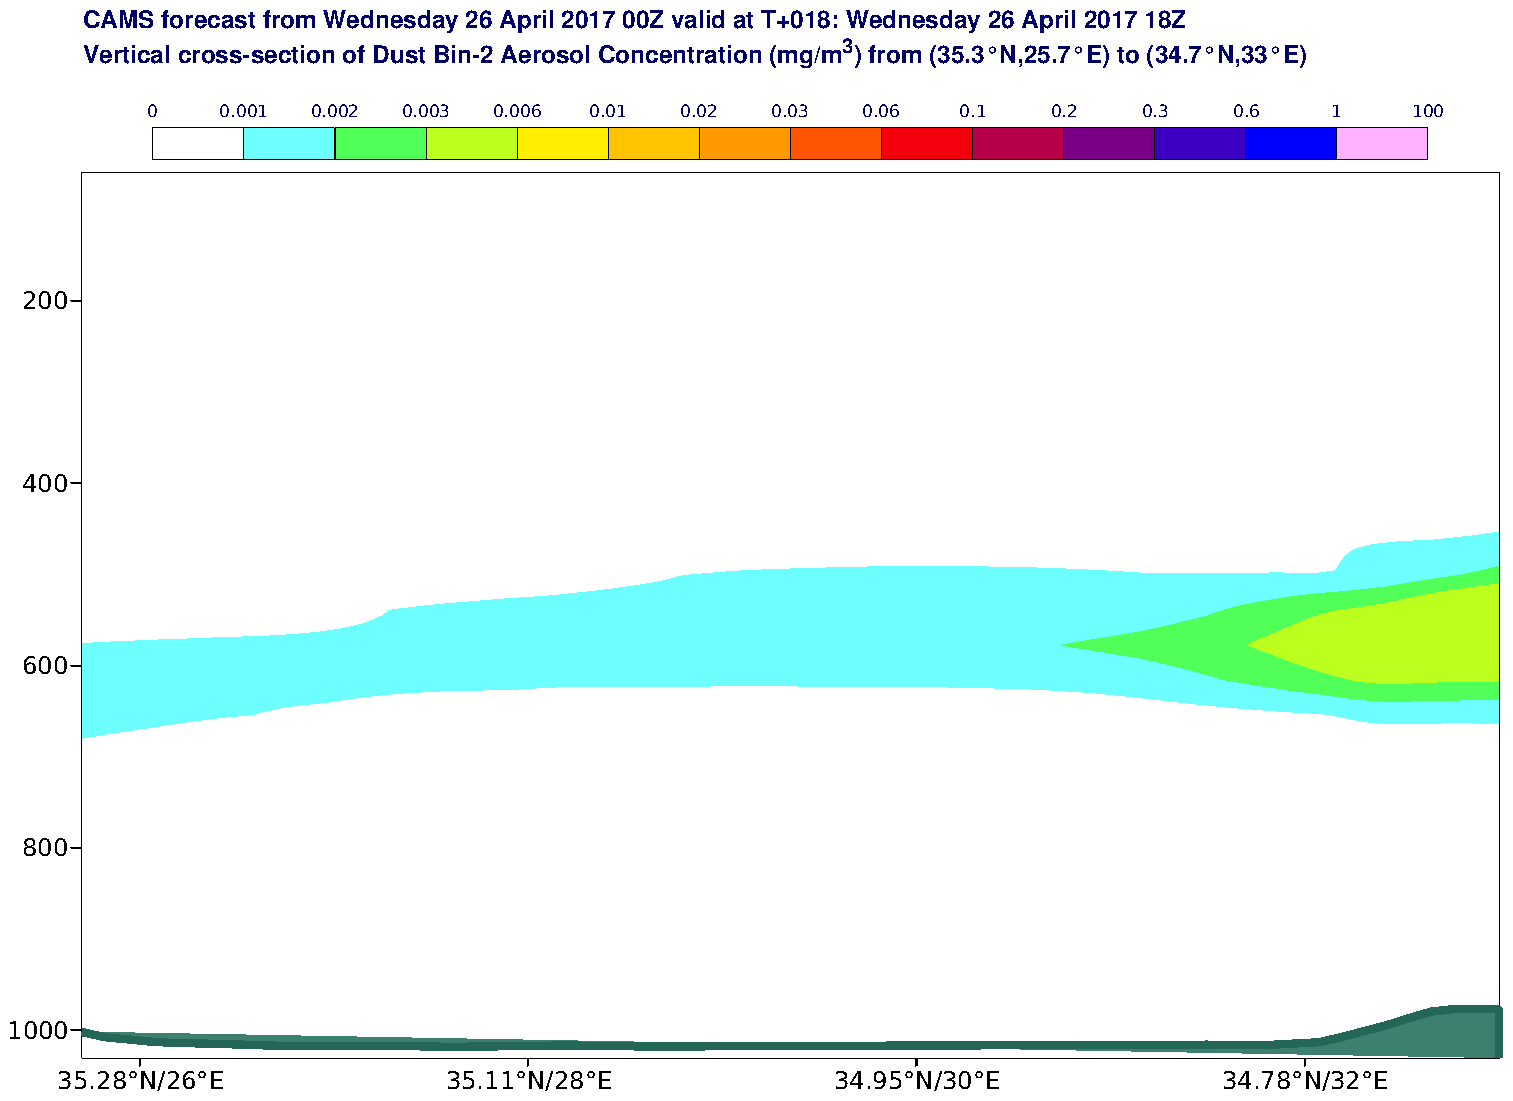 Vertical cross-section of Dust Bin-2 Aerosol Concentration (mg/m3) valid at T18 - 2017-04-26 18:00